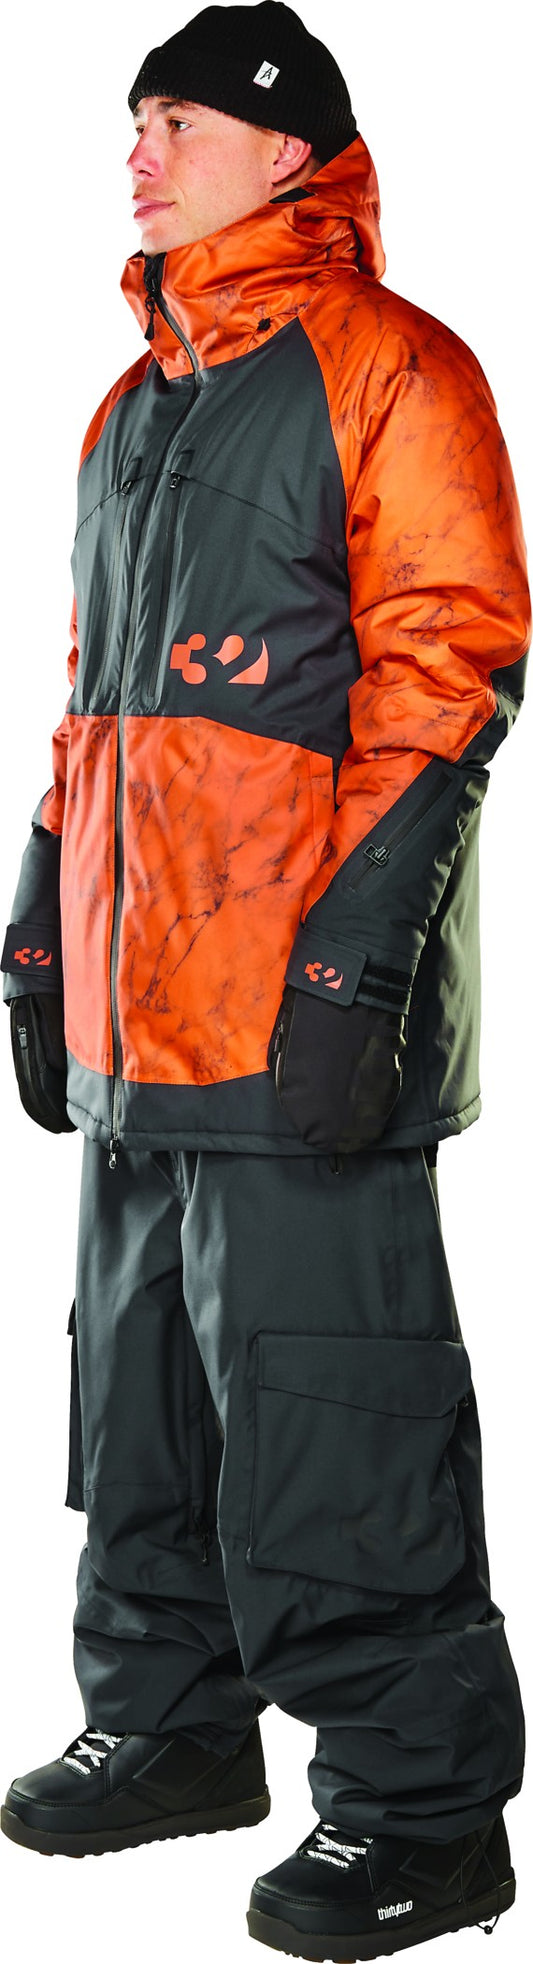 THIRTY-TWO - LASHED INSULATED JACKET